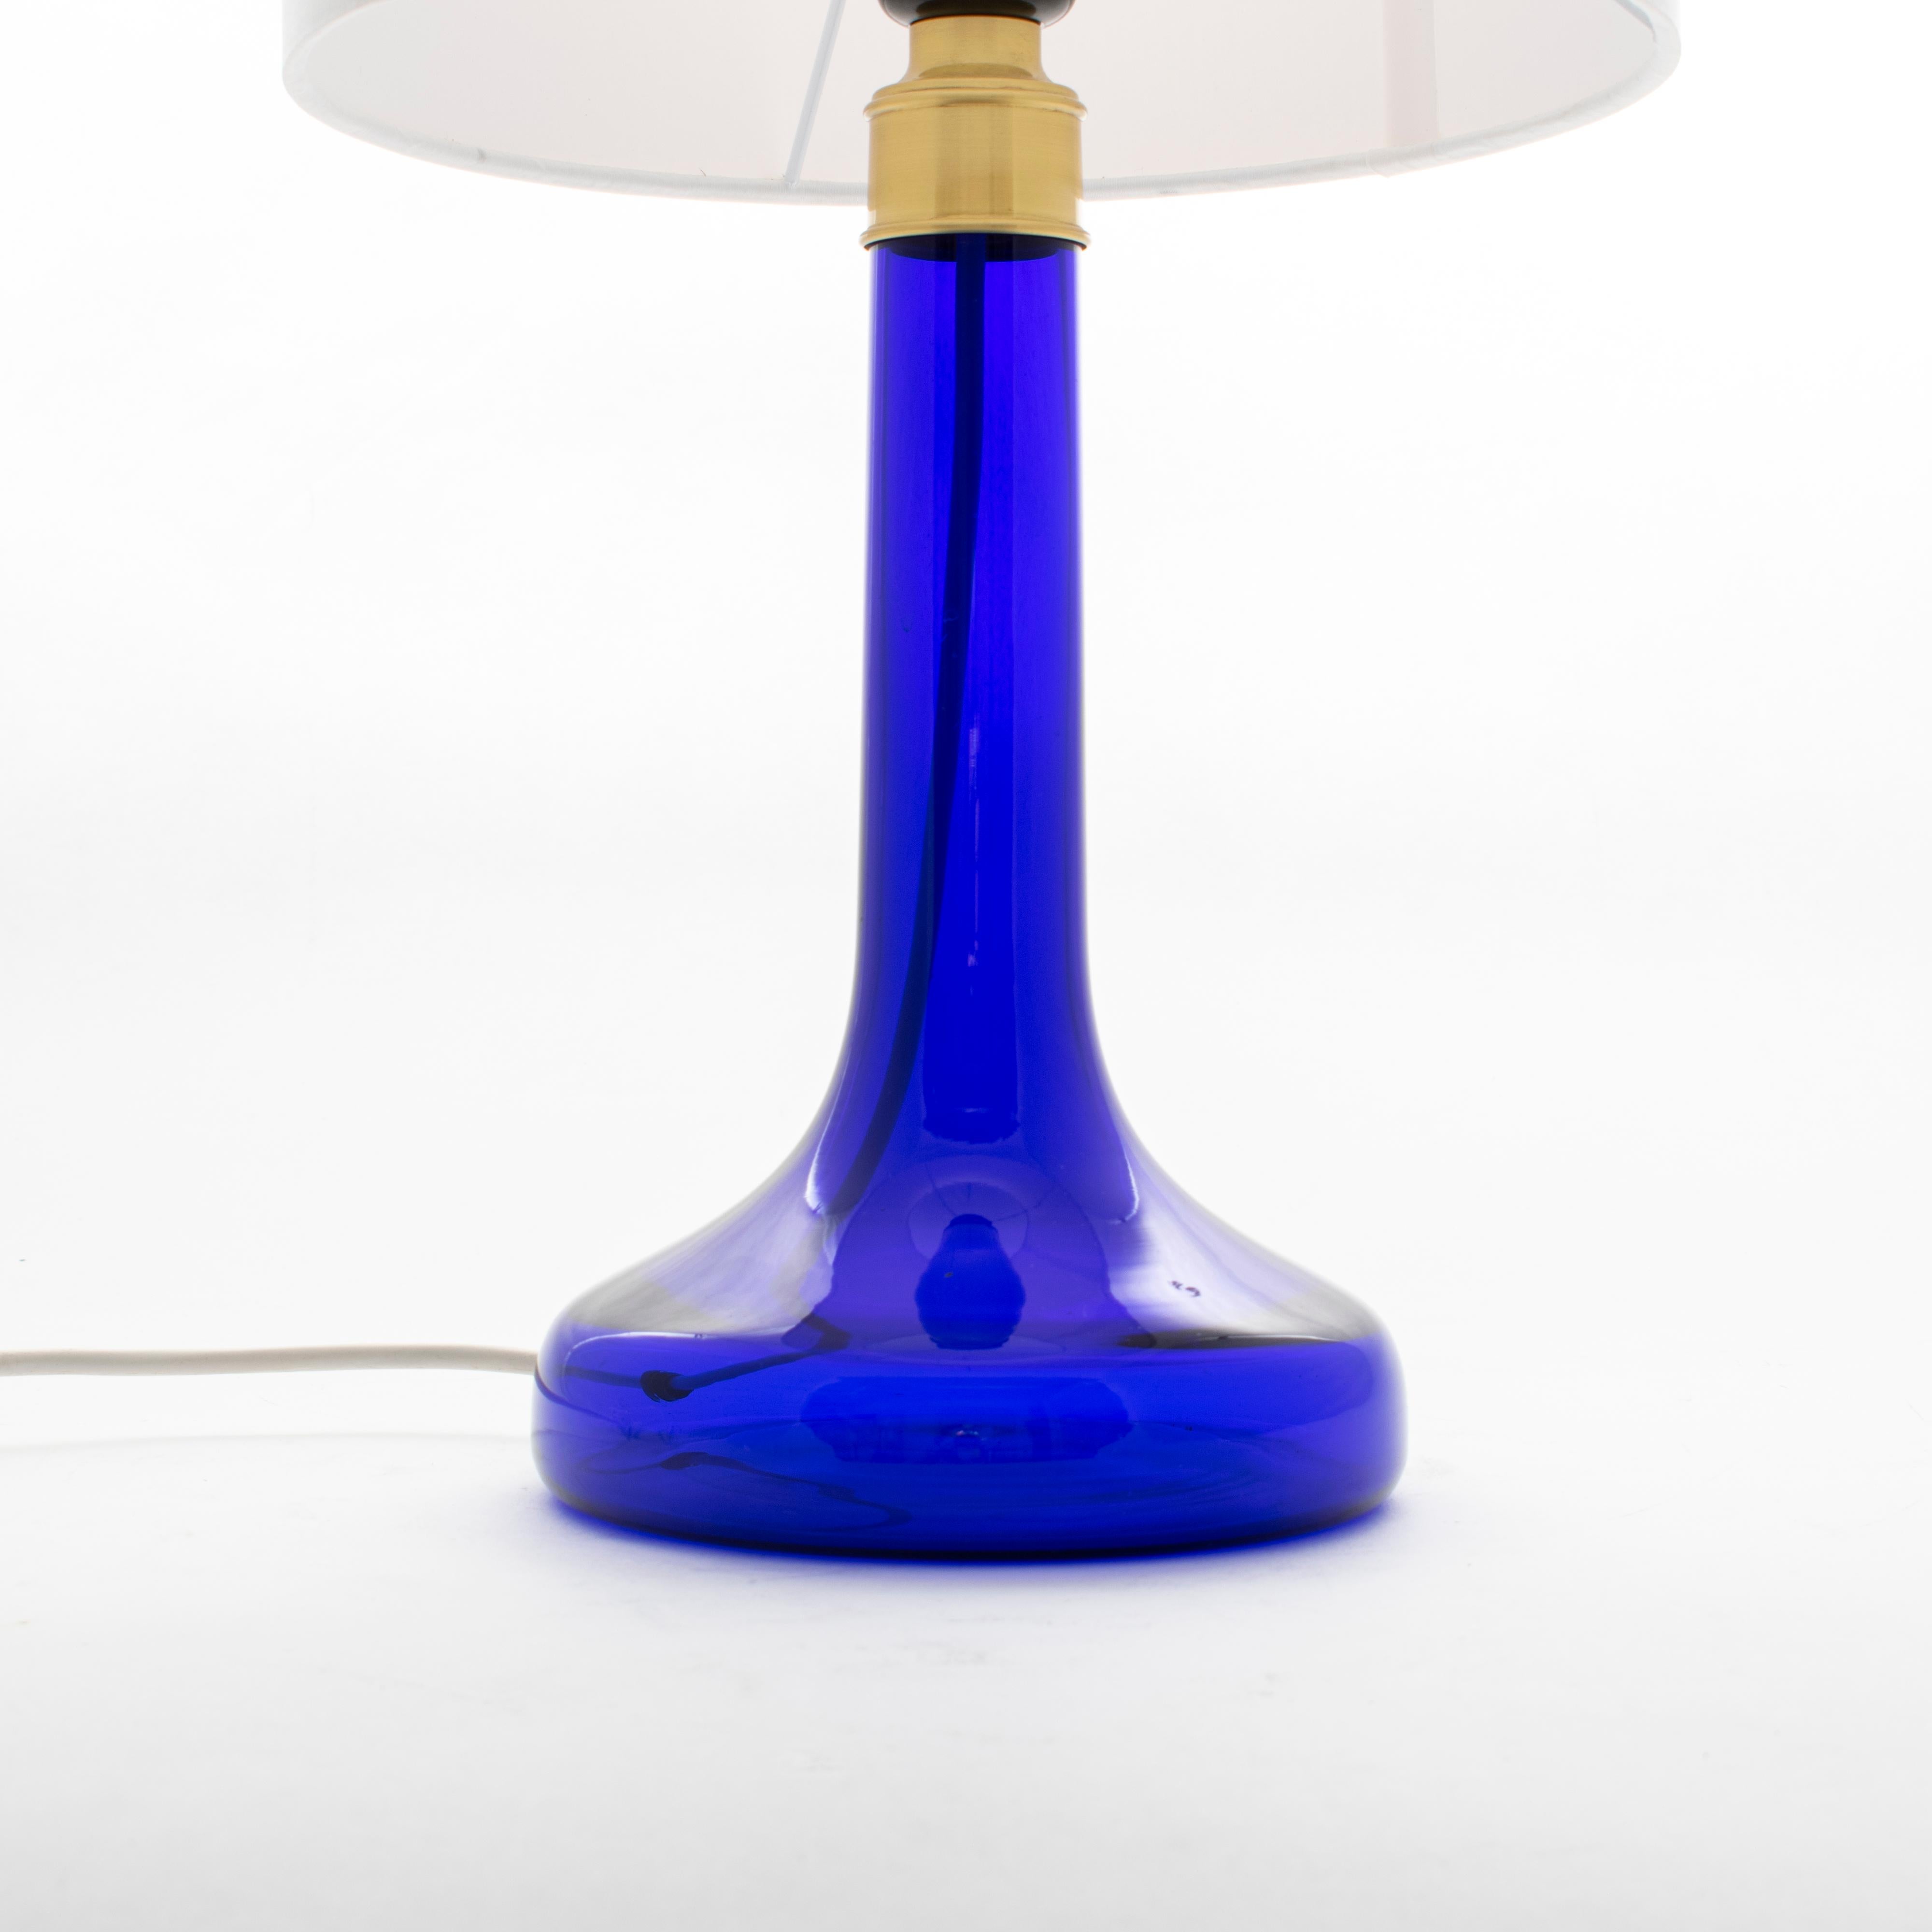 Danish table lamp model 343 by designer by Biilmann-Petersen.
The lamp foot is made of mouth blown translucent dark blue glass from Holmegaard glass works and has a top made of brass.

Measures: Height lamp base without socket: 26 cm
Height lamp